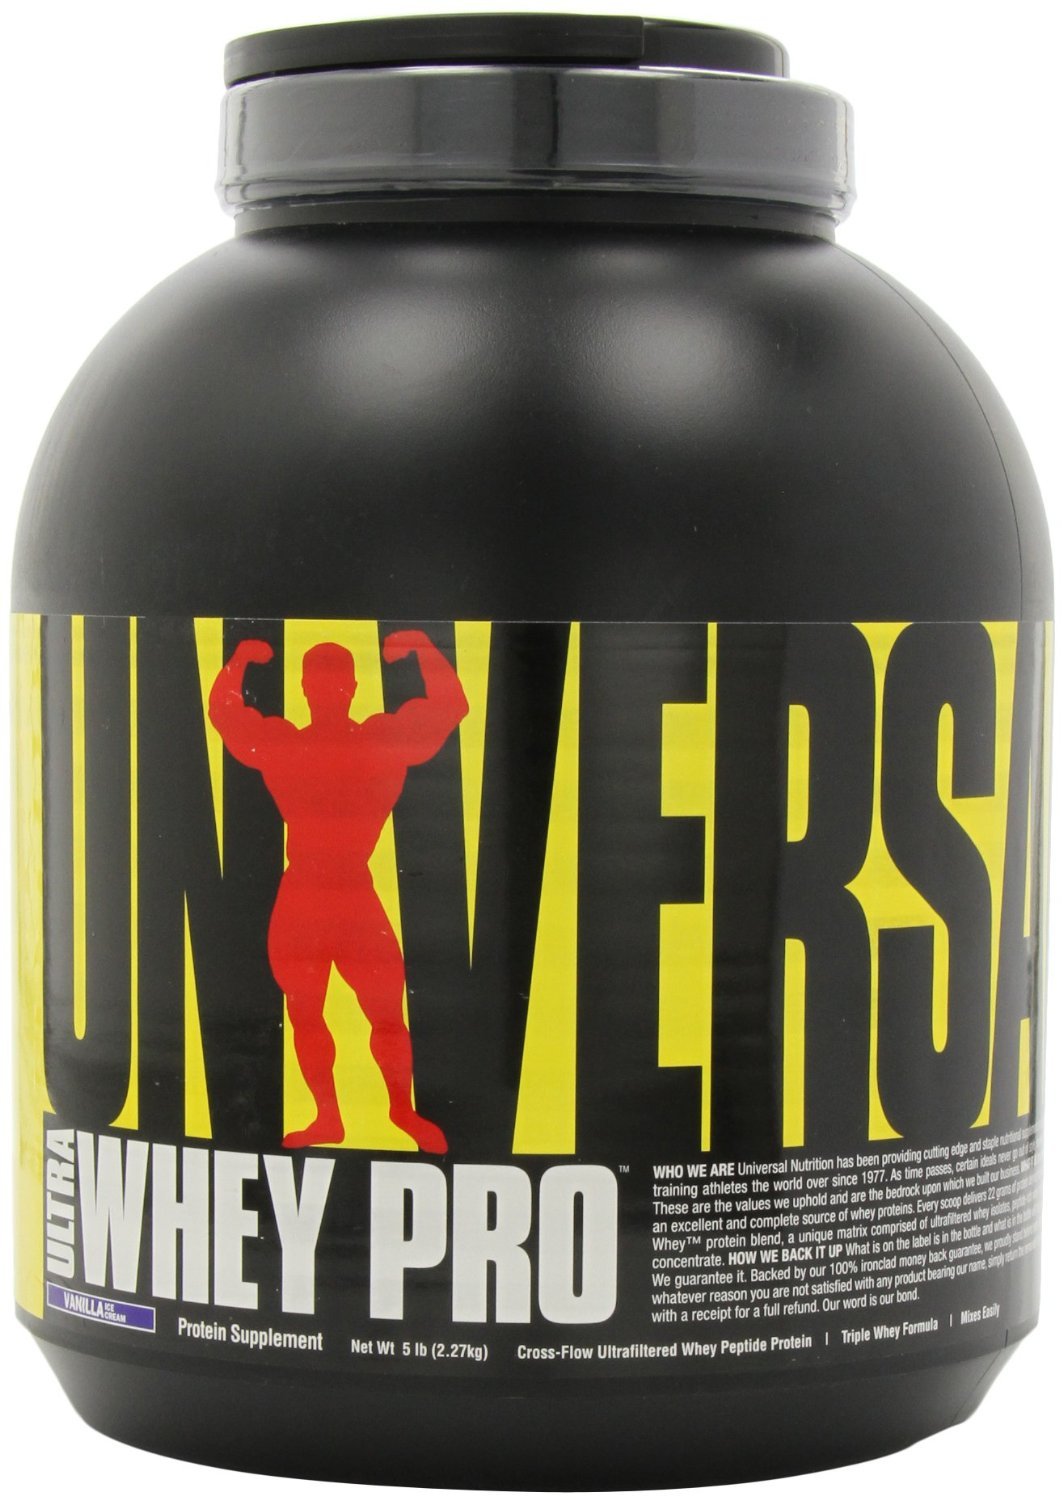 Ultra Whey Pro, 2270 g, Universal Nutrition. Whey Protein Blend. 